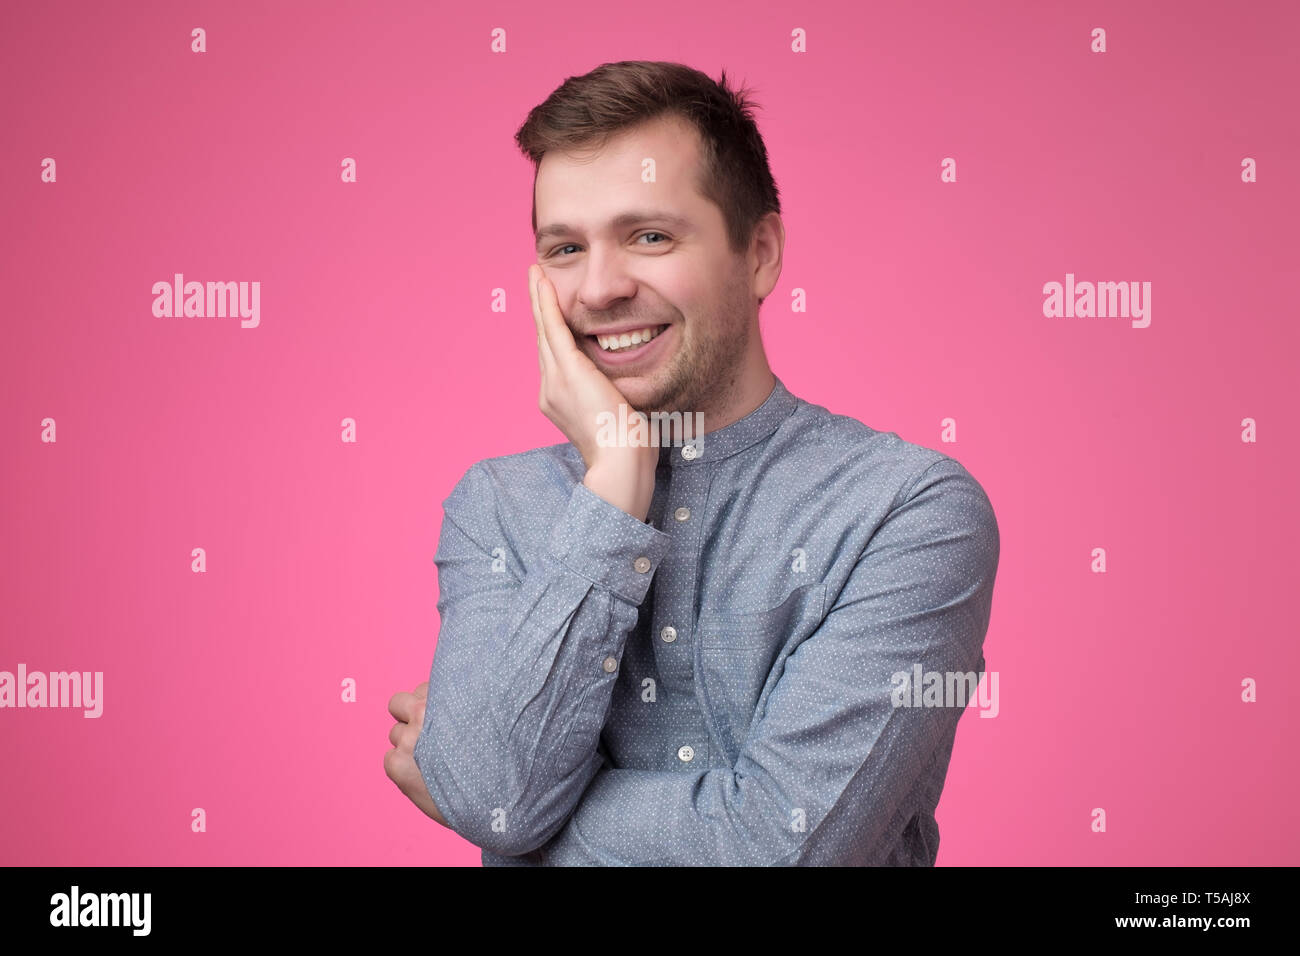 Smiling young caucasian man putting his hand to his chin Stock Photo